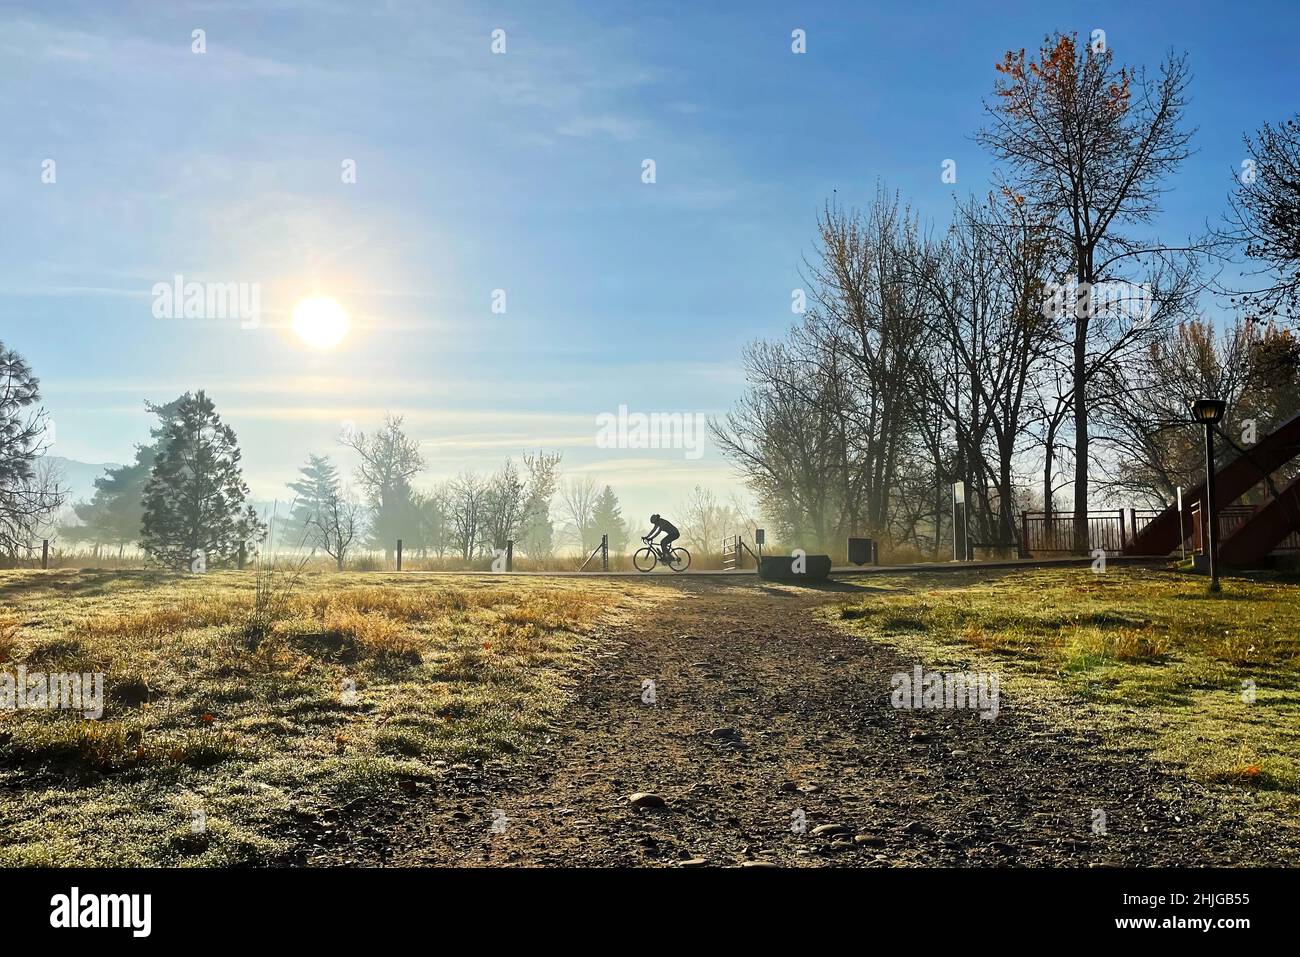 Bike rider on the Boise Greenbelt near the Warm Springs Golf Course on the foggy late fall morning. Stock Photo